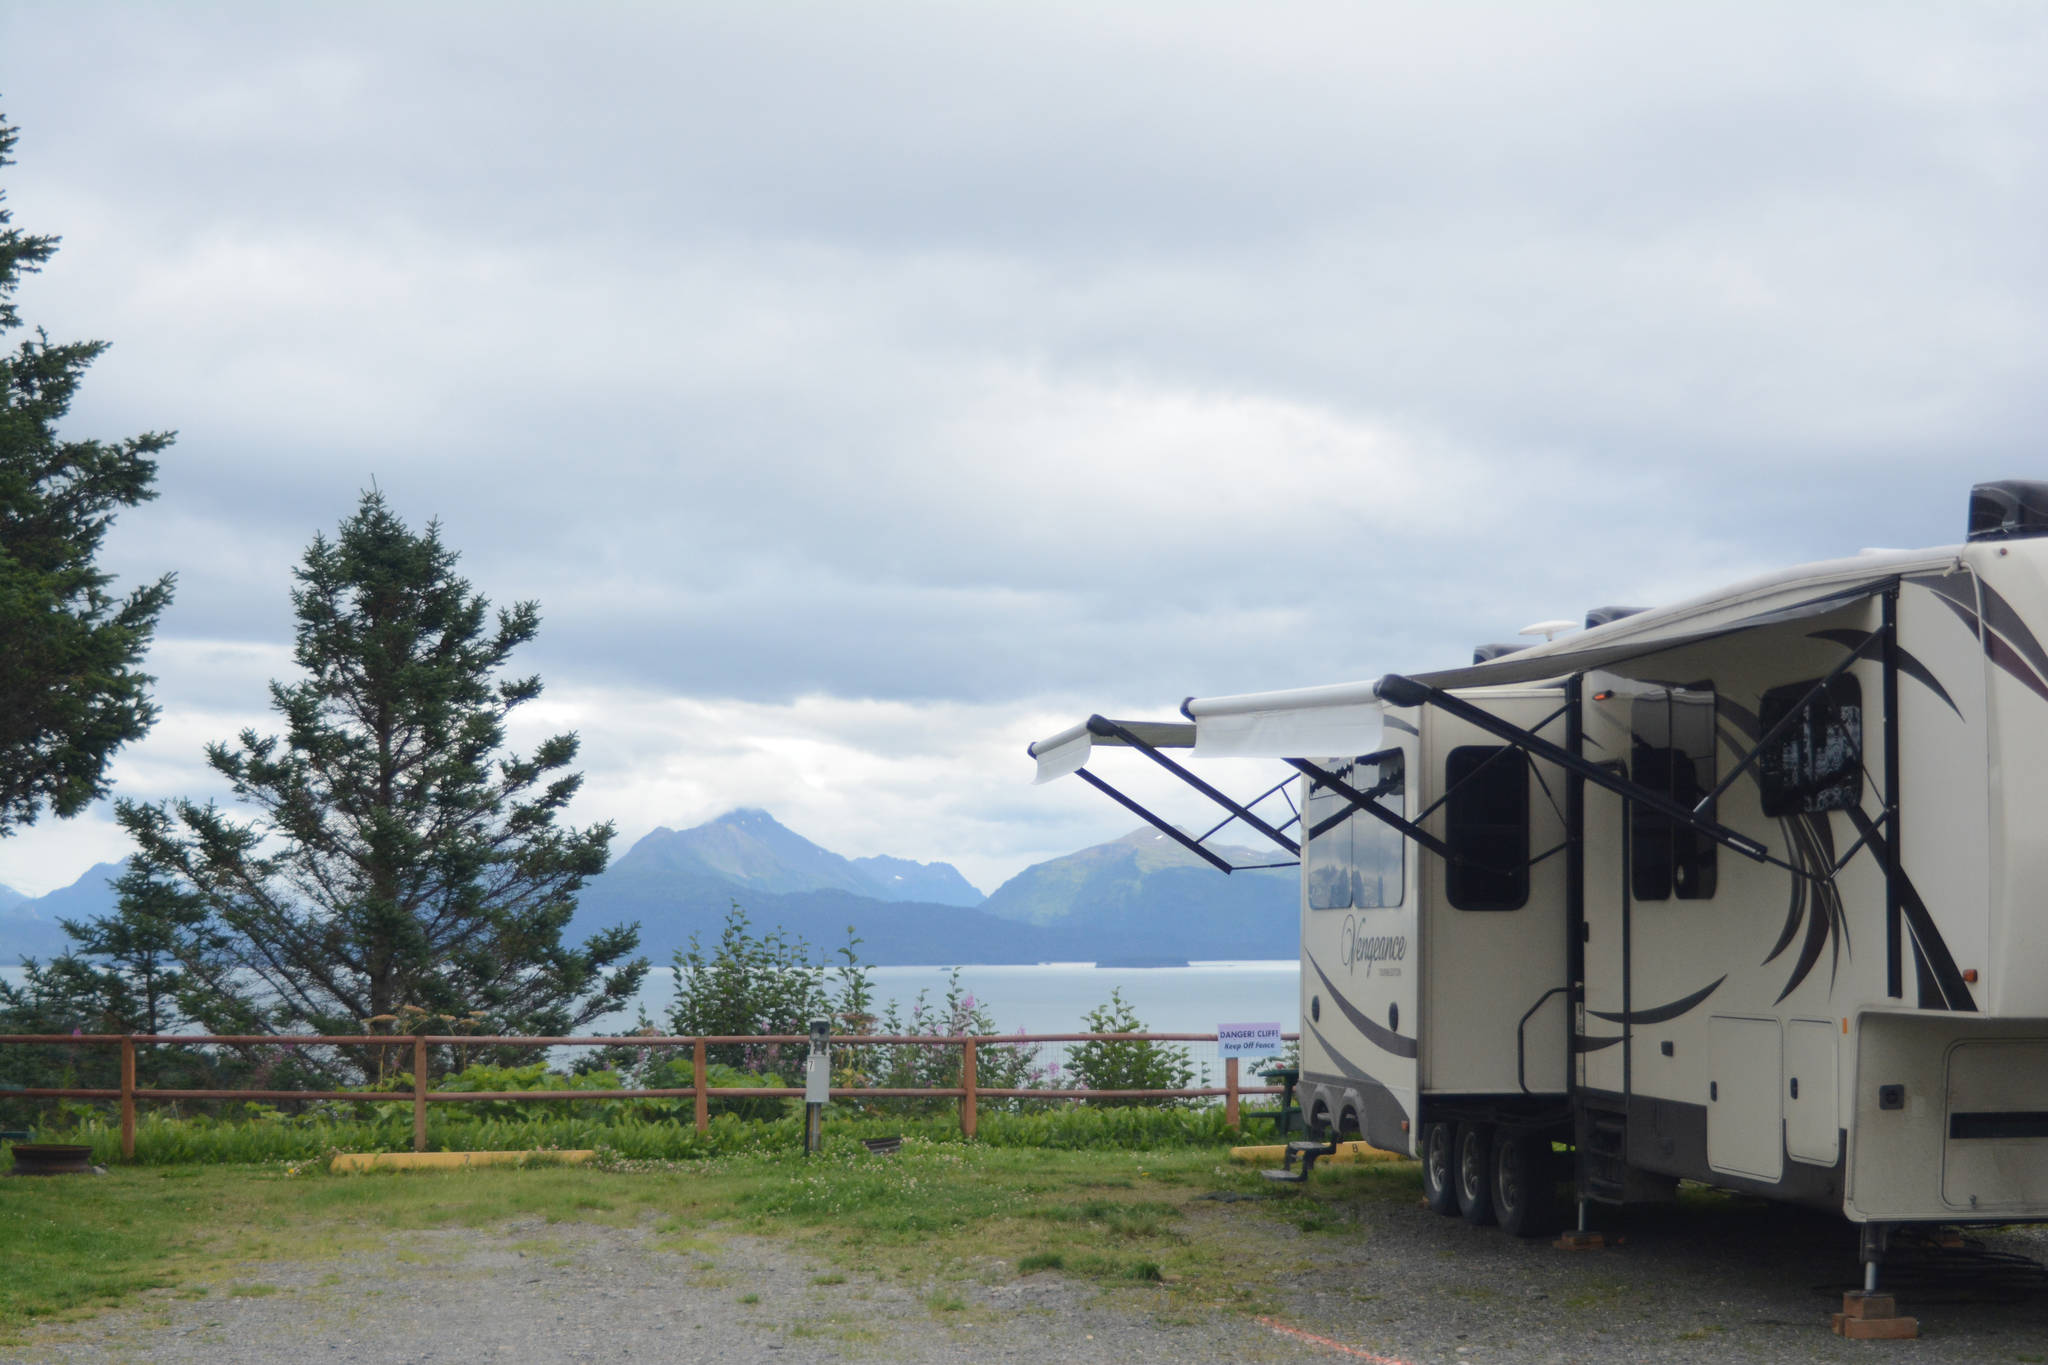 A campsite at the Homer/Baycrest KOA Holiday Campground looks out over Kachemak Bay near Baycrest Hill in Homer, Alaska, on Aug, 18, 2018. The KOA campground won the KOA Founder’s and KOA President’s awards for the second year in a row. (Photo by Michael Armstrong/Homer News).